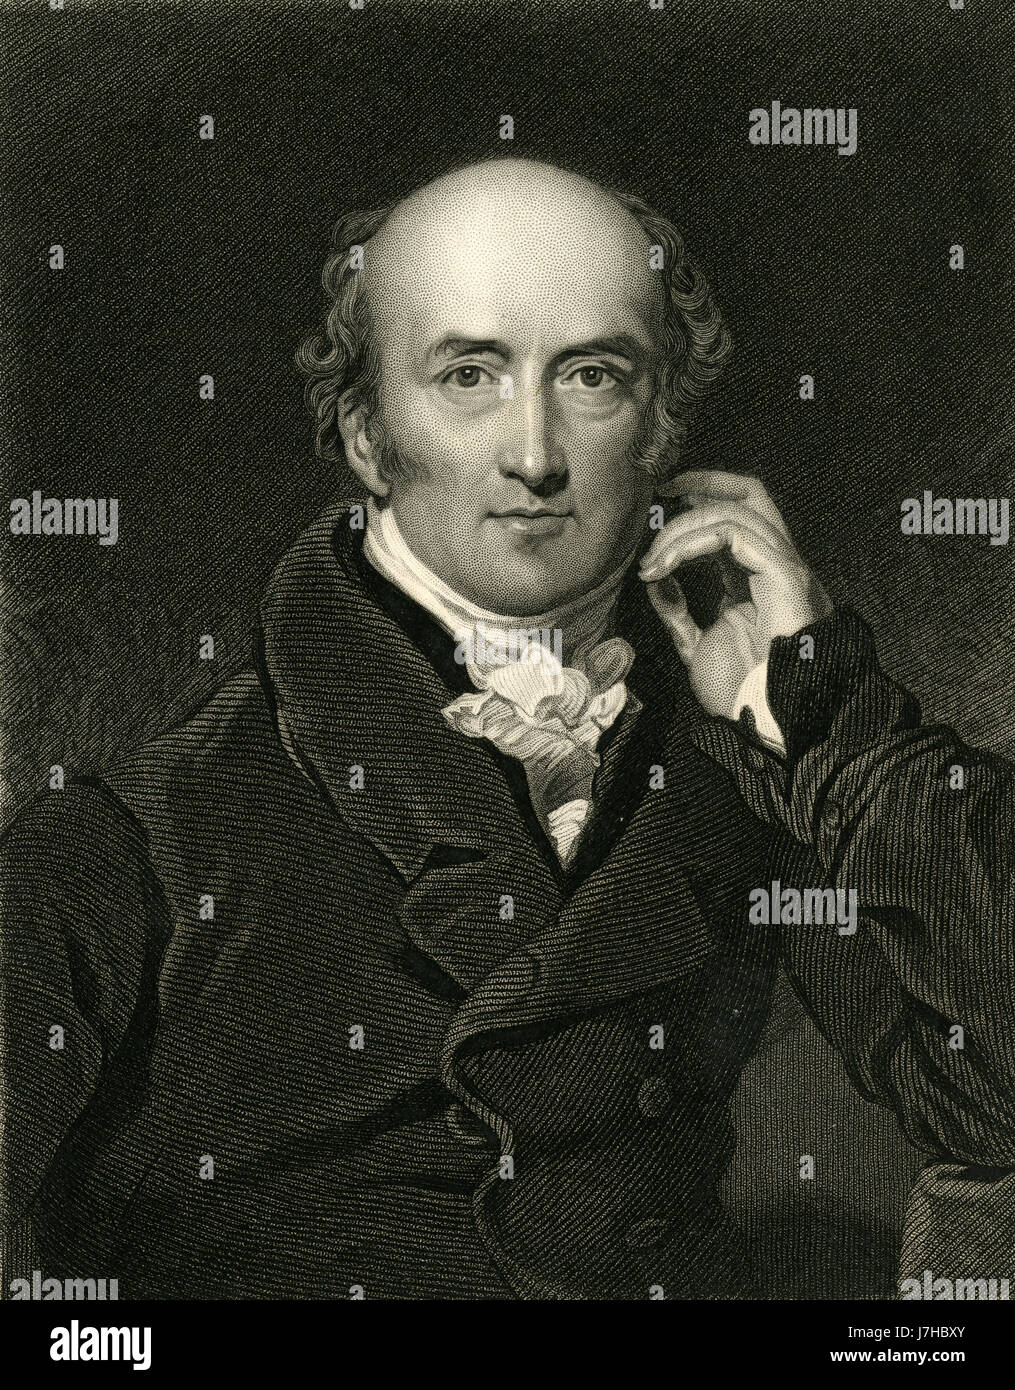 Antique 1836 engraving, George Canning. George Canning (1770-1827) was a British statesman and Tory politician who served in various senior cabinet positions under numerous Prime Ministers, before himself serving as Prime Minister for the final four months of his life. SOURCE: ORIGINAL ENGRAVING. Stock Photo